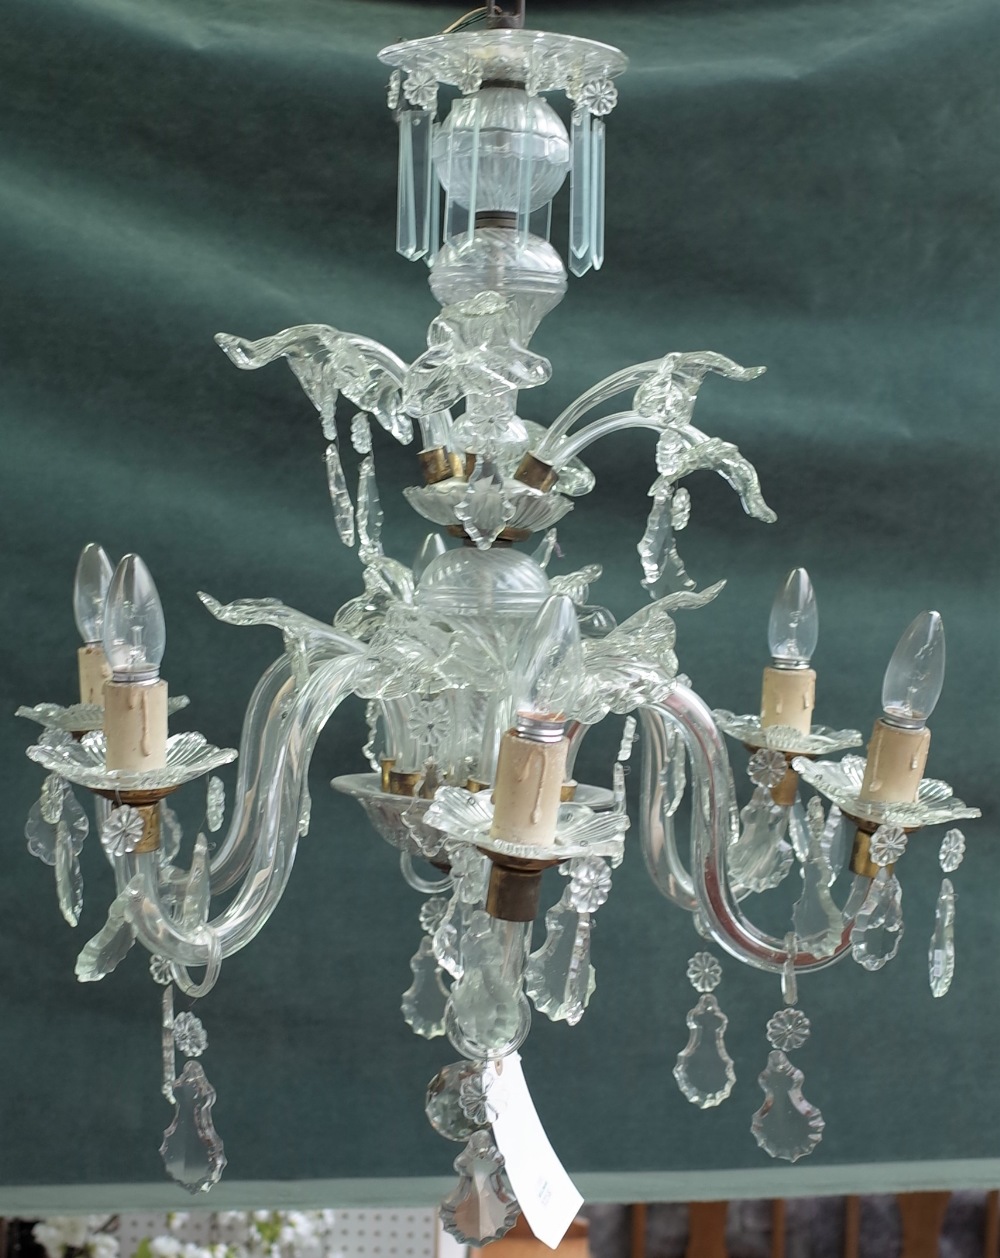 A 20th century Italian style glass six light chandelier with spiral column and moulded branches - Image 3 of 3